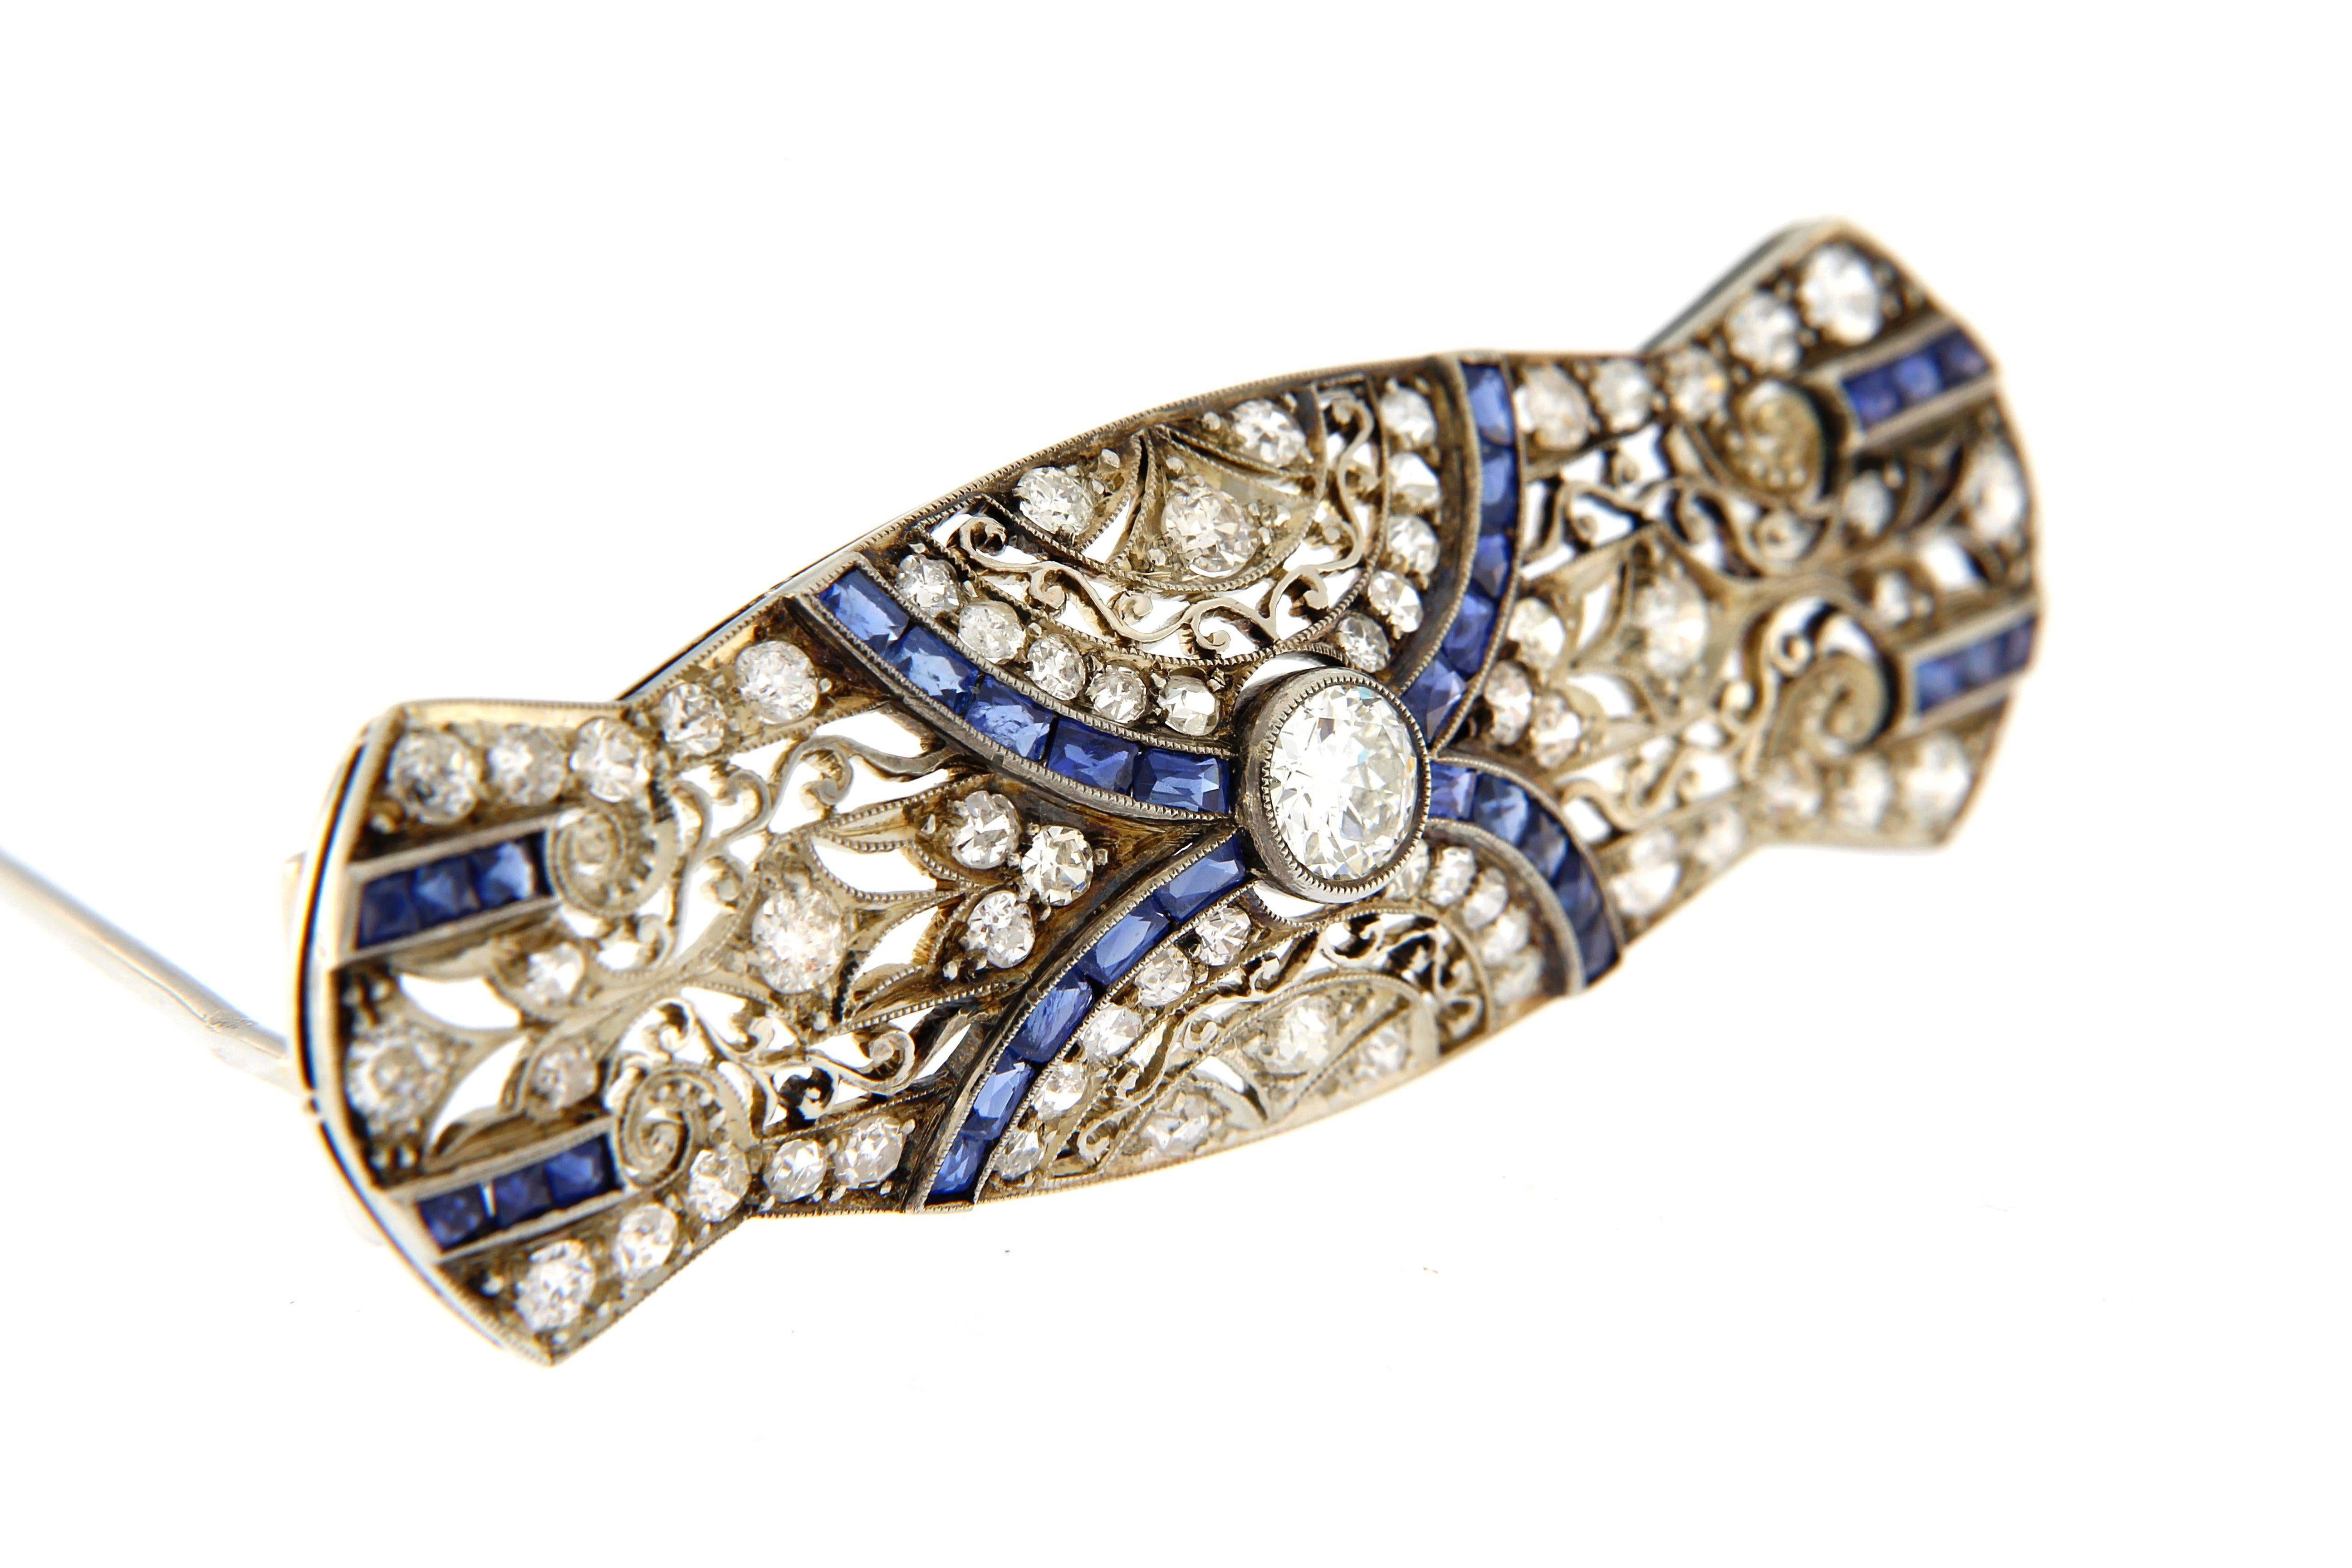 Art Decò style , for this beautiful original brooche set with old cut diamonds and sapphire ( hidden setting )
old cut diamond ct. 1.05
sapphires